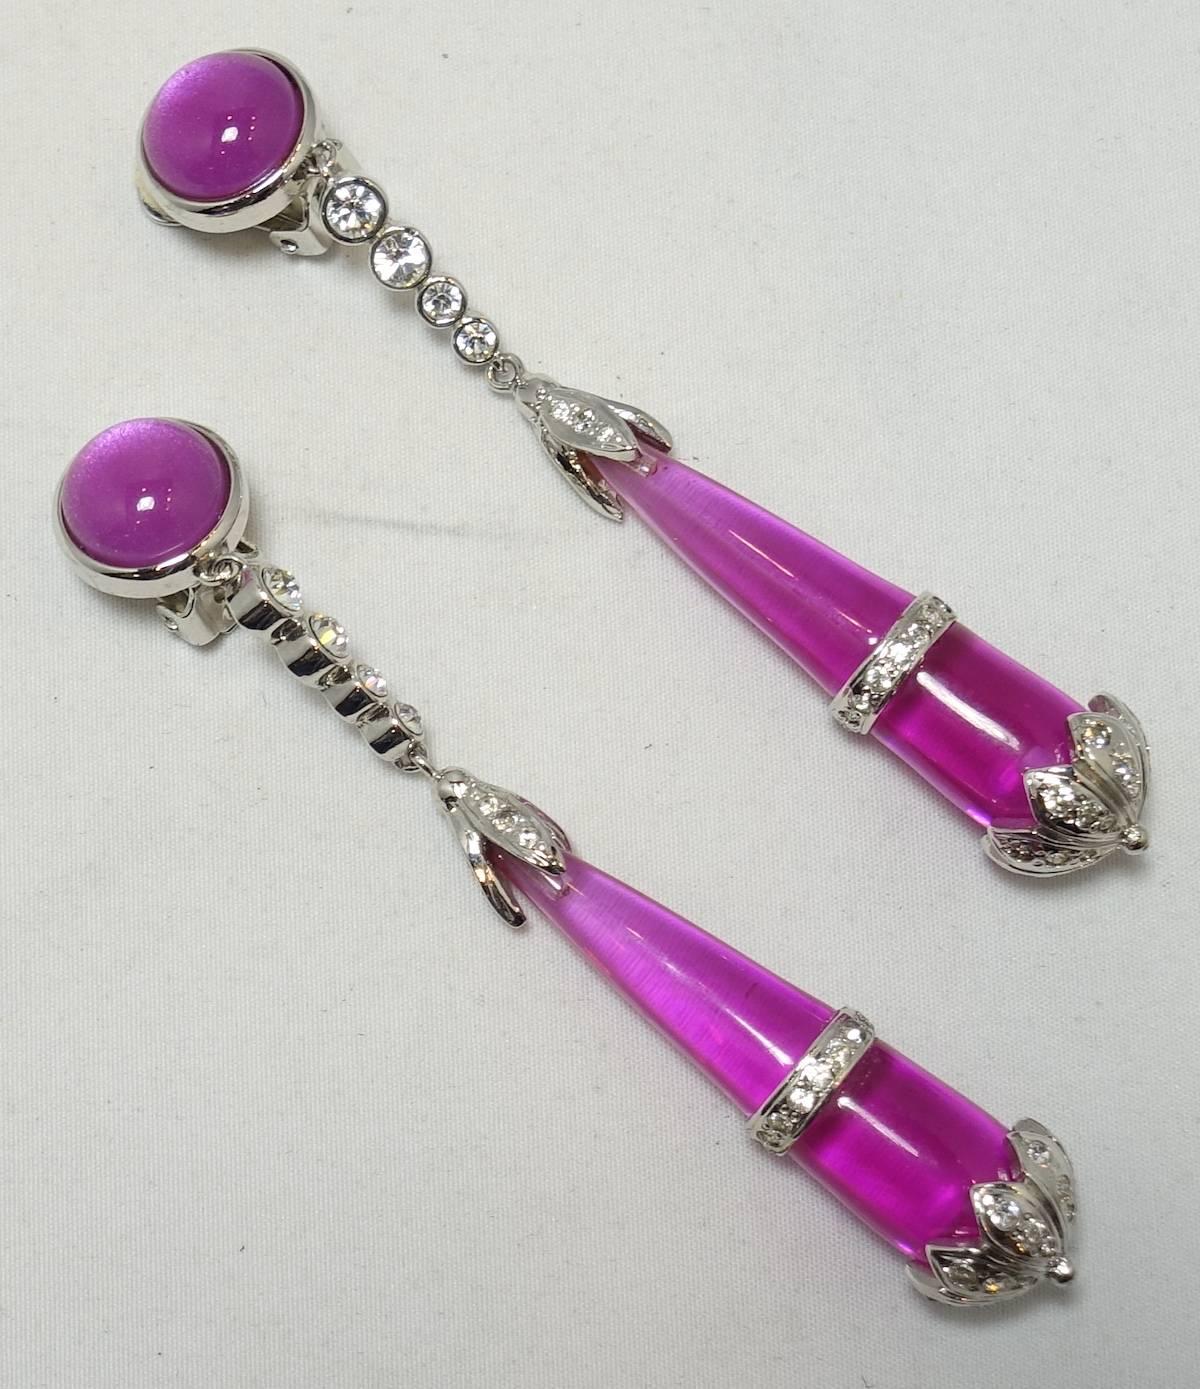 These stunning earrings feature a teardrop design with hot pink resin accented by clear crystals in a silver tone setting.  These clip earrings measure 4” x 1/2” and signed “Replica Made In Italy”.  They are in excellent condition.